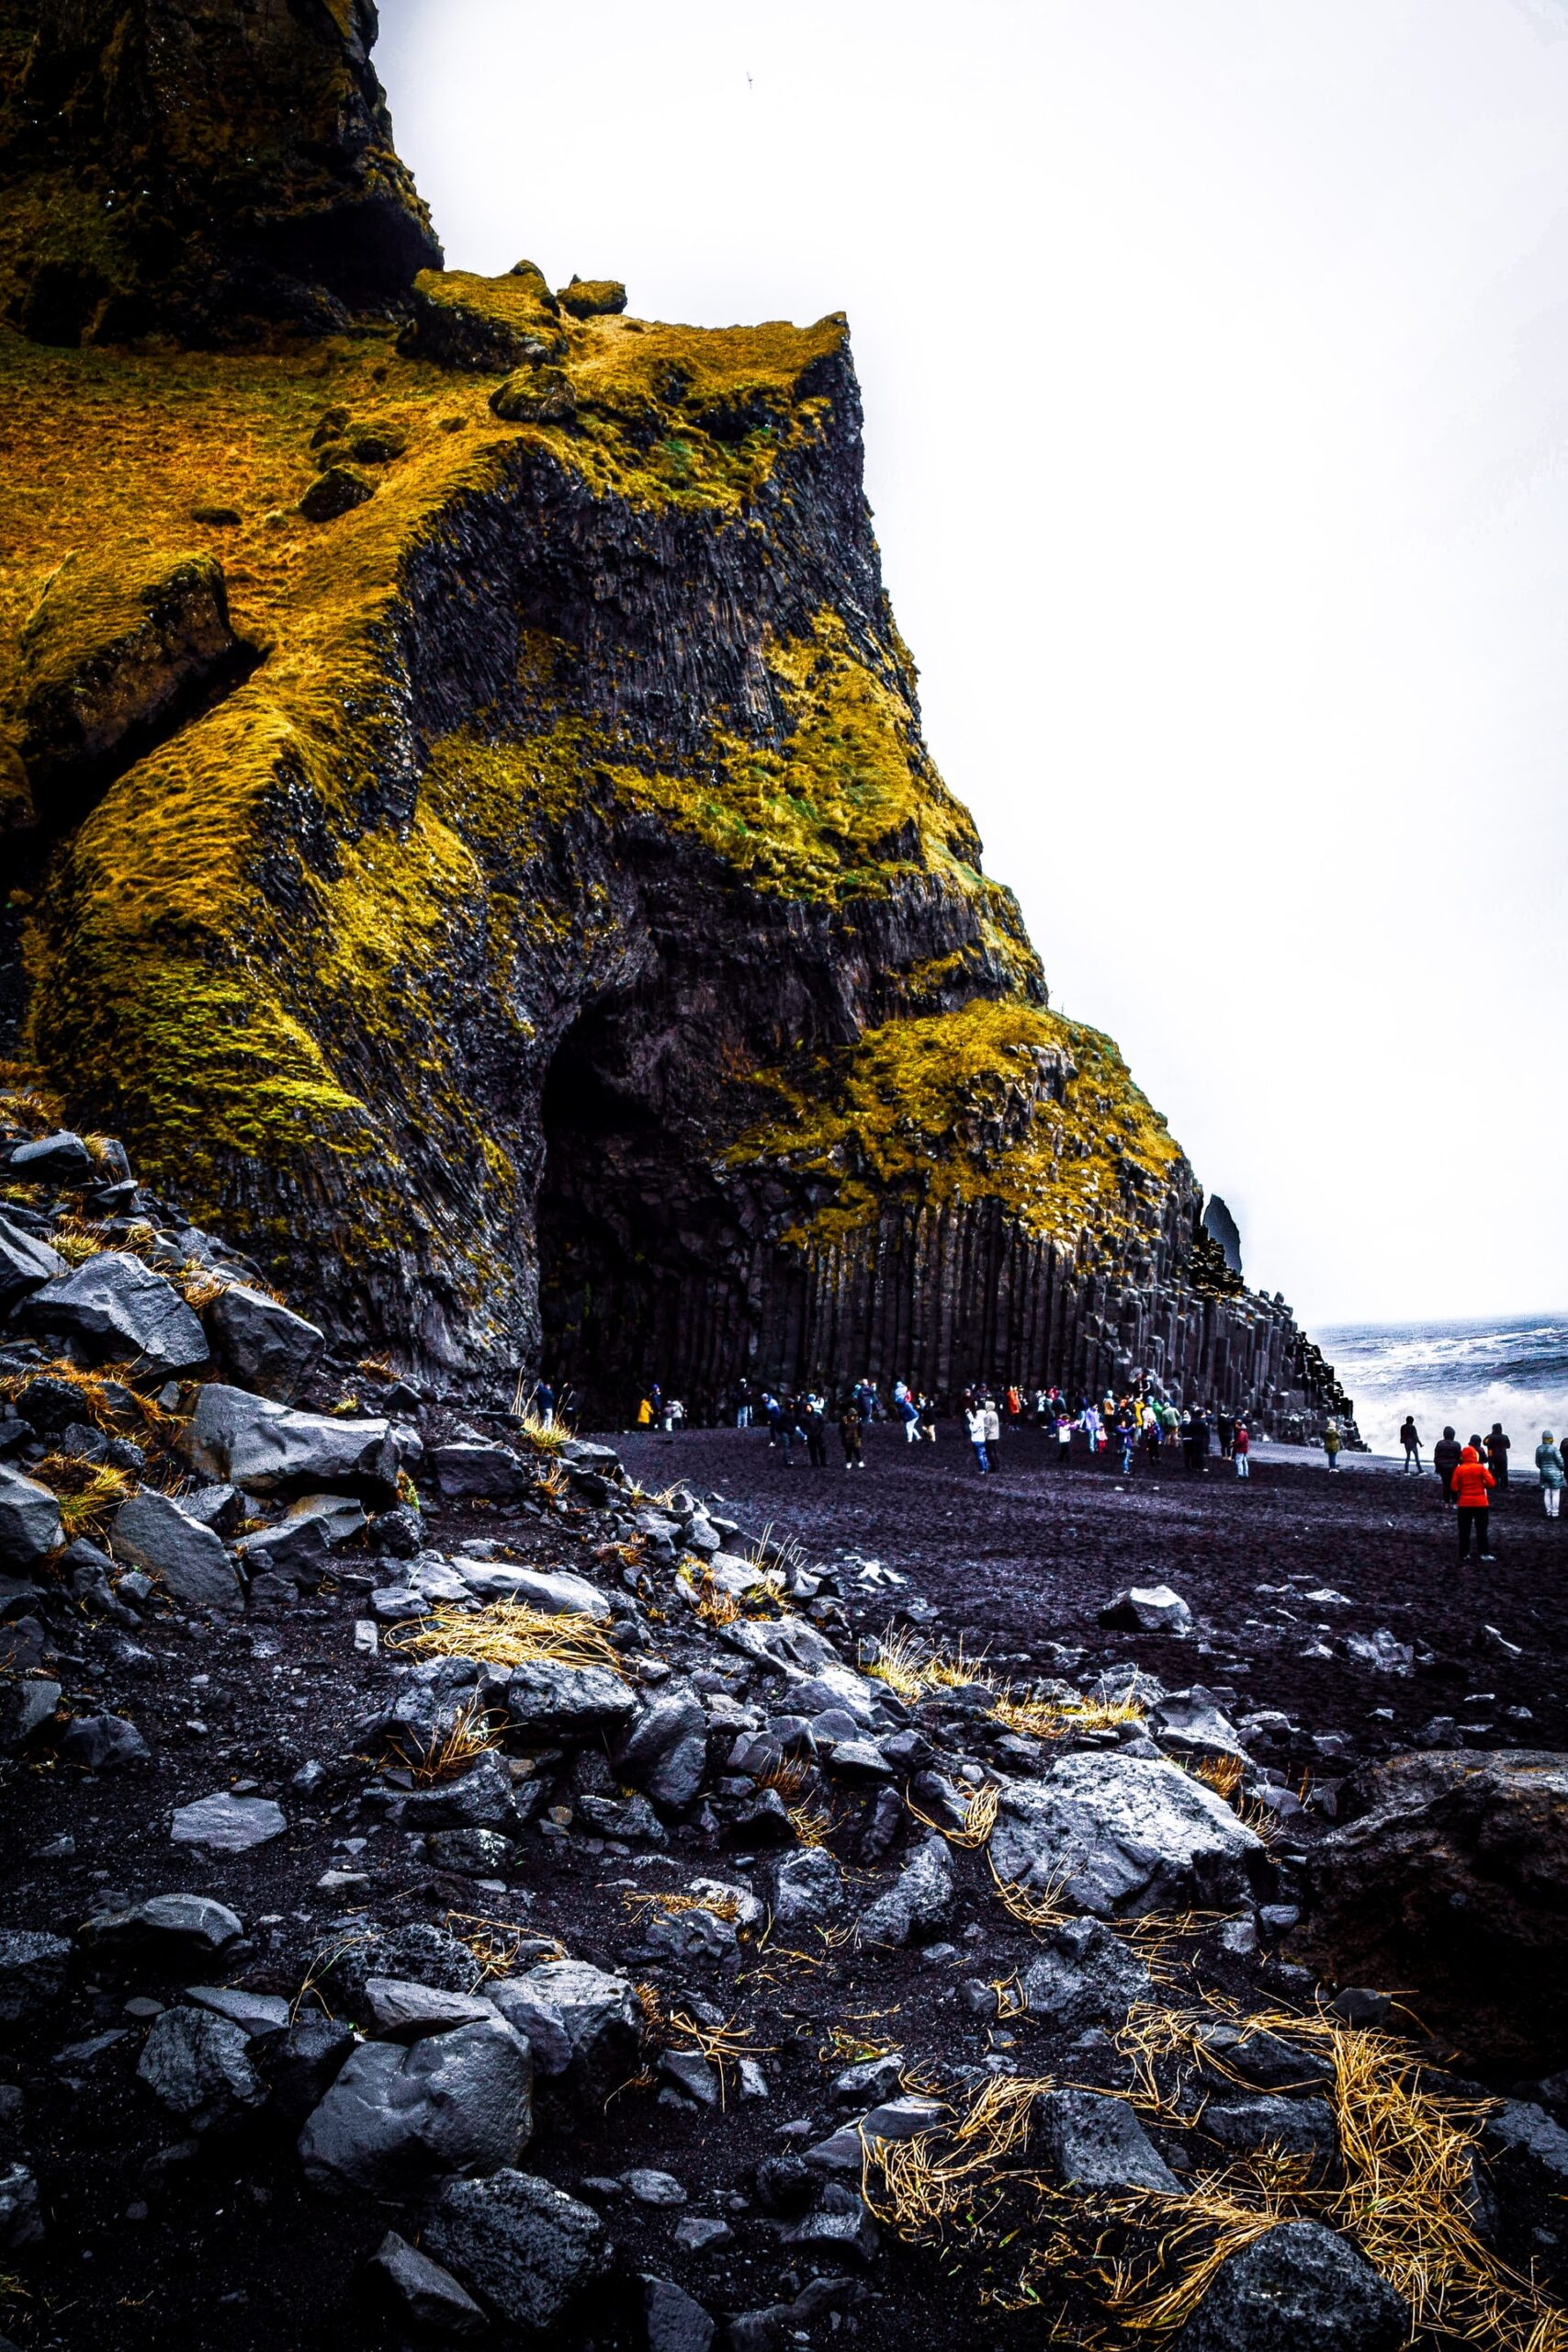 Image description: A black-sand beach, filled with tourists taking photographs, leads to a cave beneath a large, moss-covered cliff in Iceland. End of alt text. 